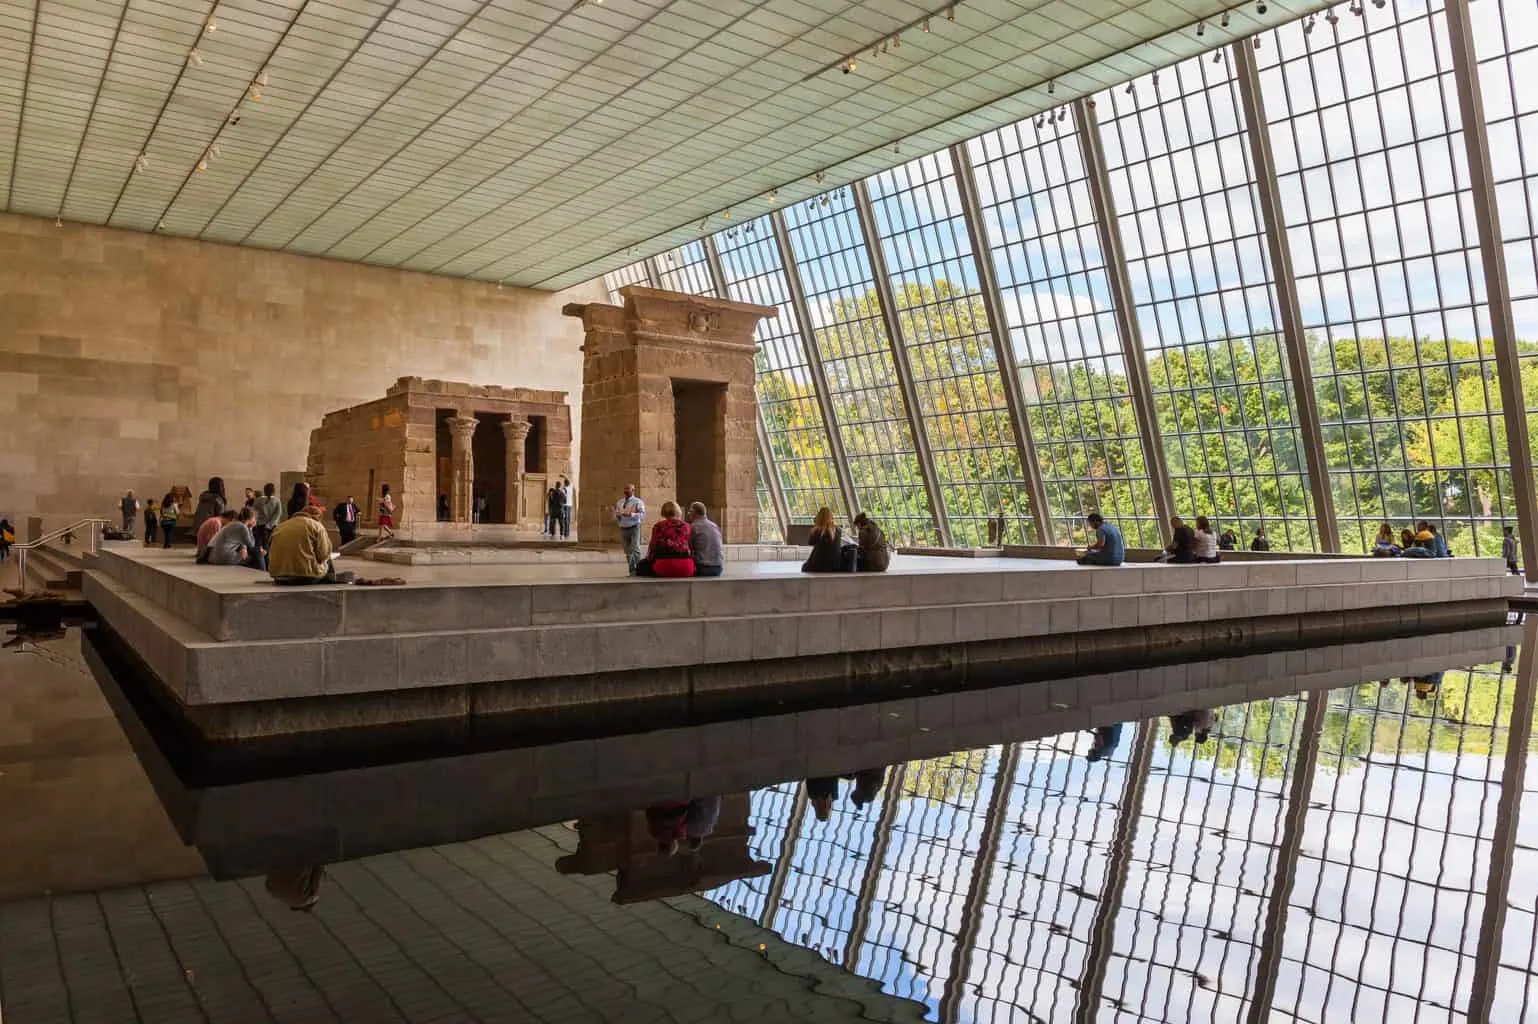 Don't let the high price tag deter you from visiting some of New York City's most amazing museums, like the Metropolitan Museum of Art.